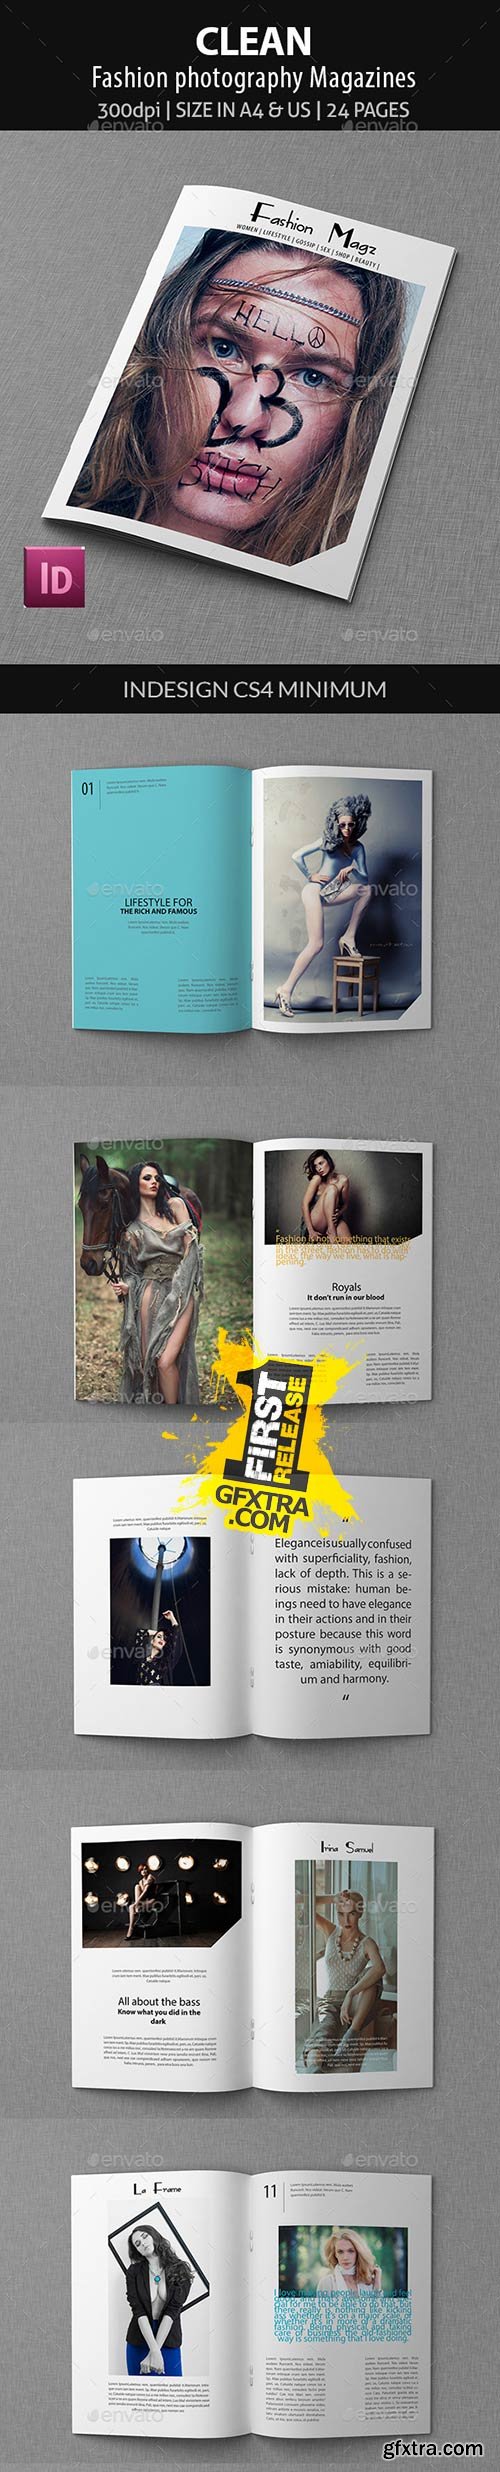 GraphicRiver - Clean - Fashion photography Magazines 9528862